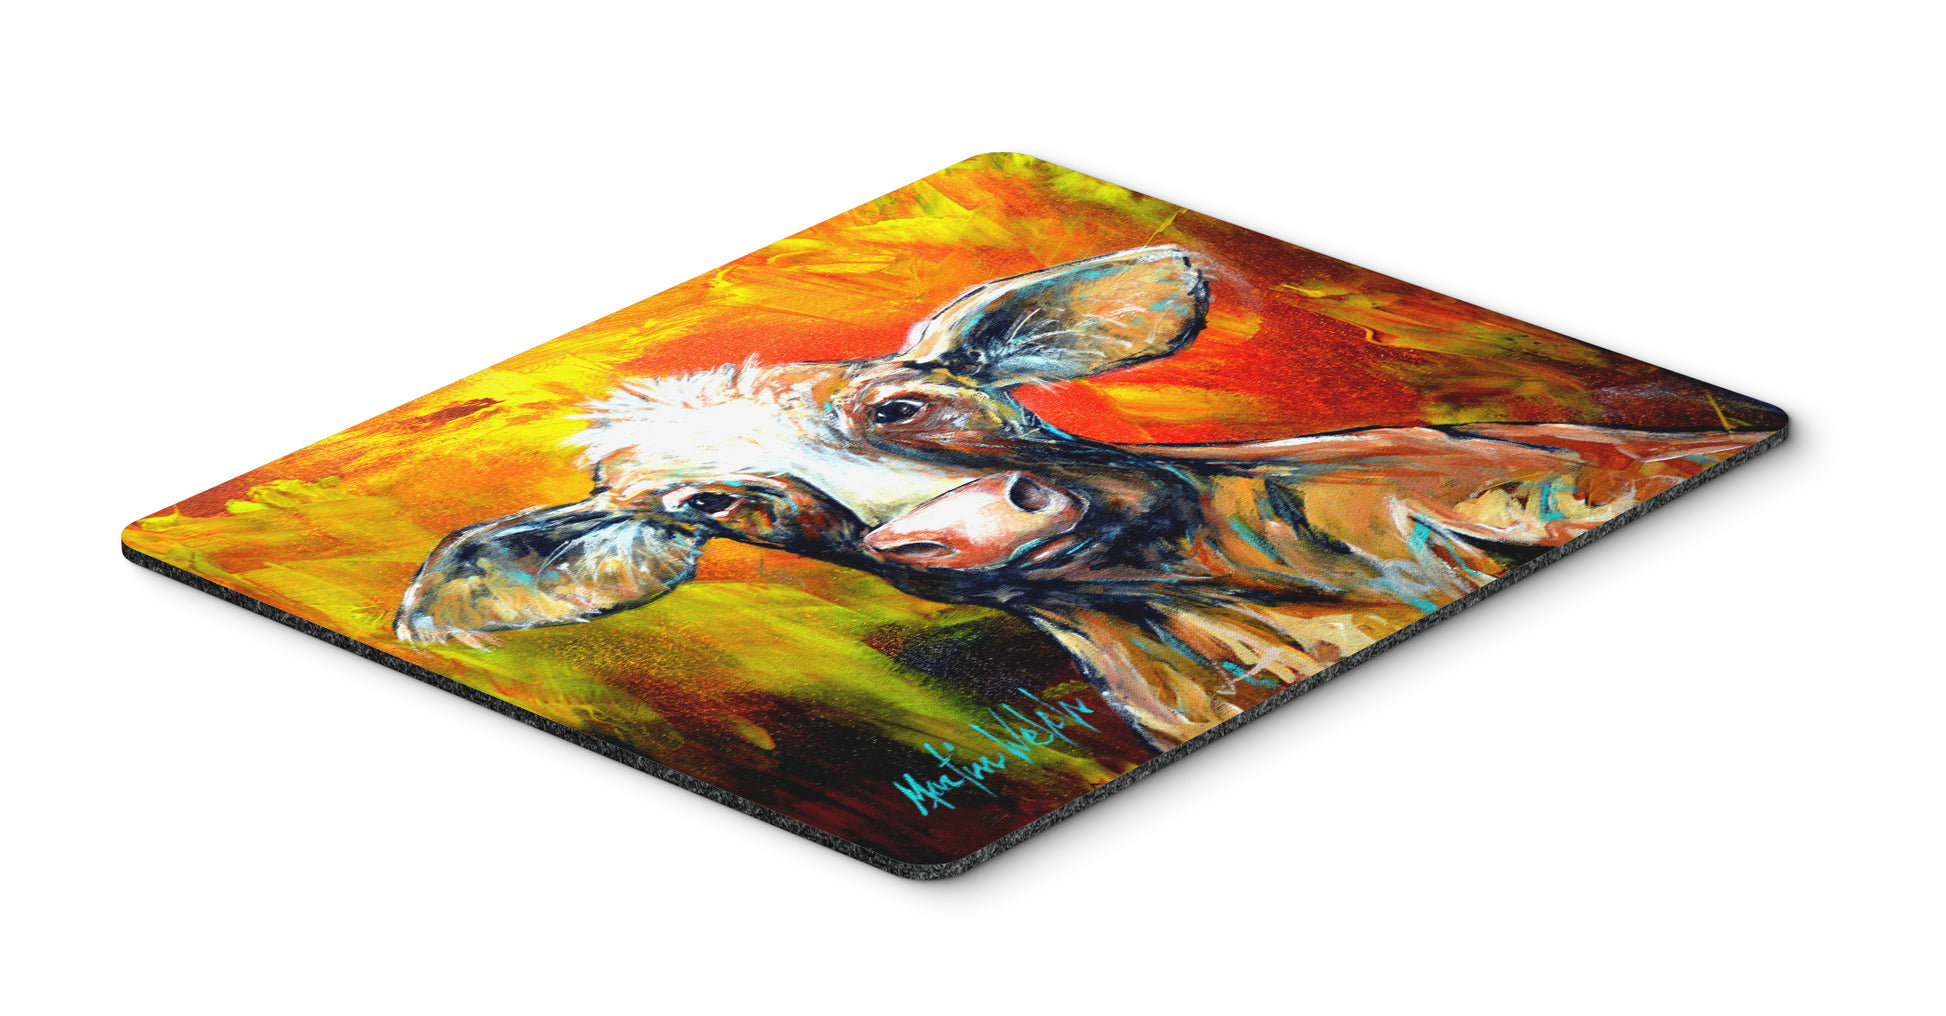 Buy this Another Happy Cow Mouse Pad, Hot Pad or Trivet